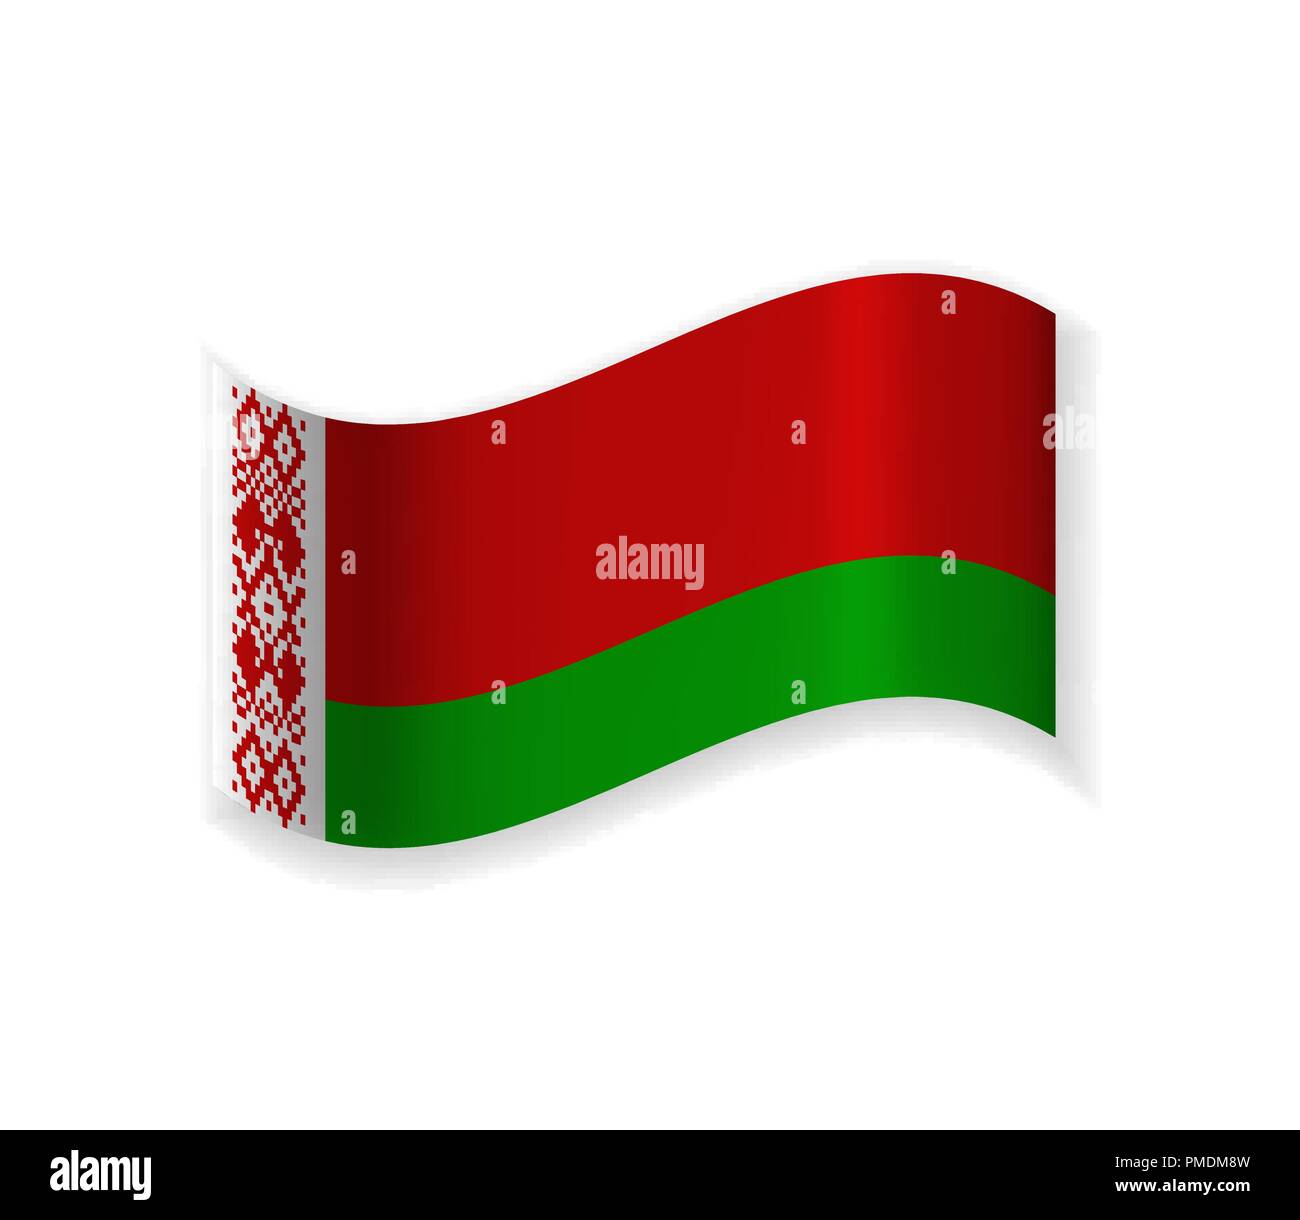 Flag Of The Republic Of Belarus. Country In Eastern Europe. Vector illustration. Stock Vector